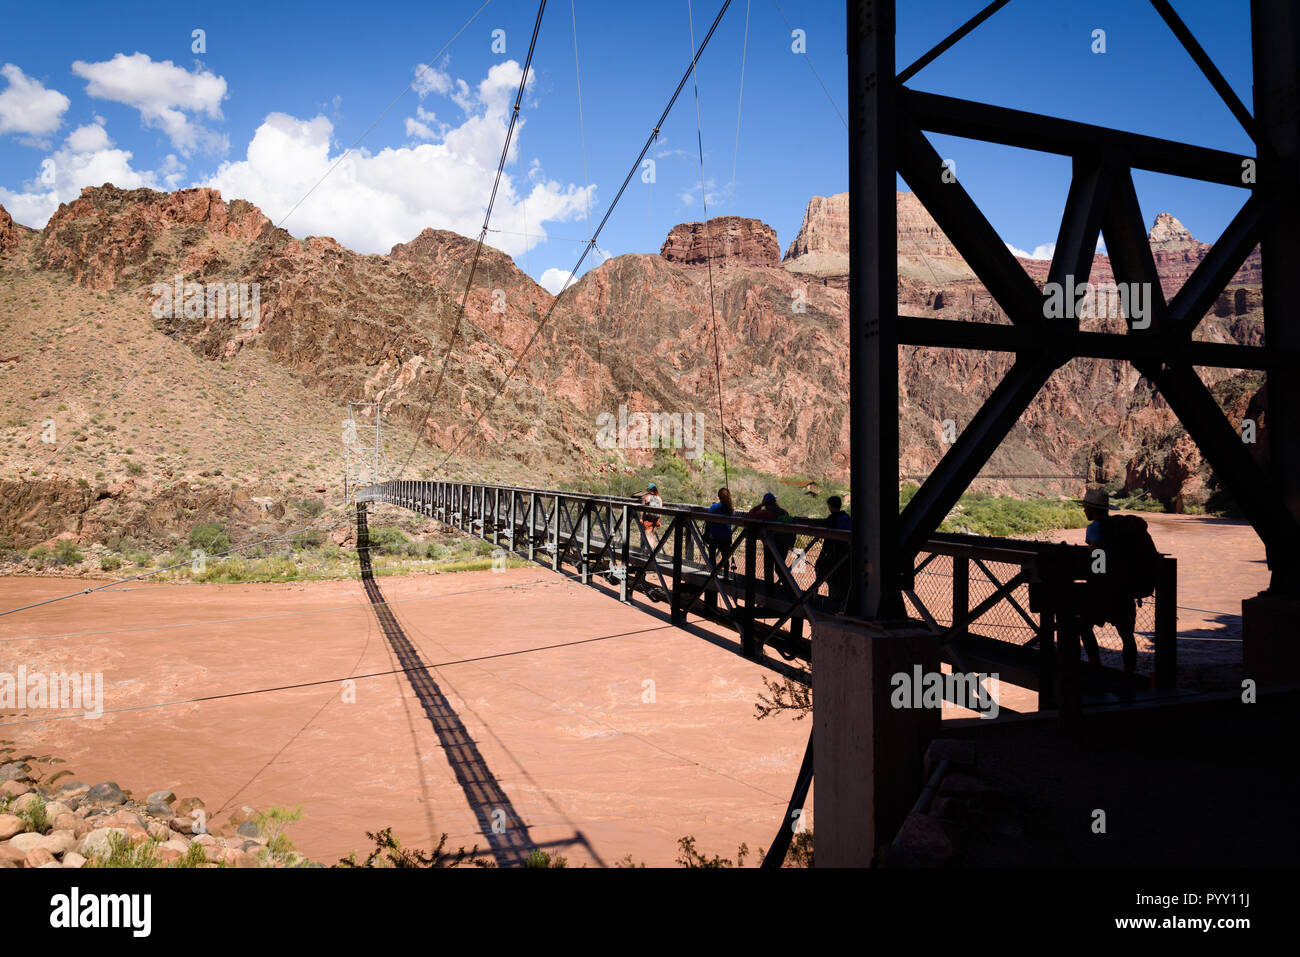 Silver Bridge connects the Bright Angel Trail to Phantom Ranch by crossing the Colorado River in the Grand Canyon, Arizona, USA. Stock Photo